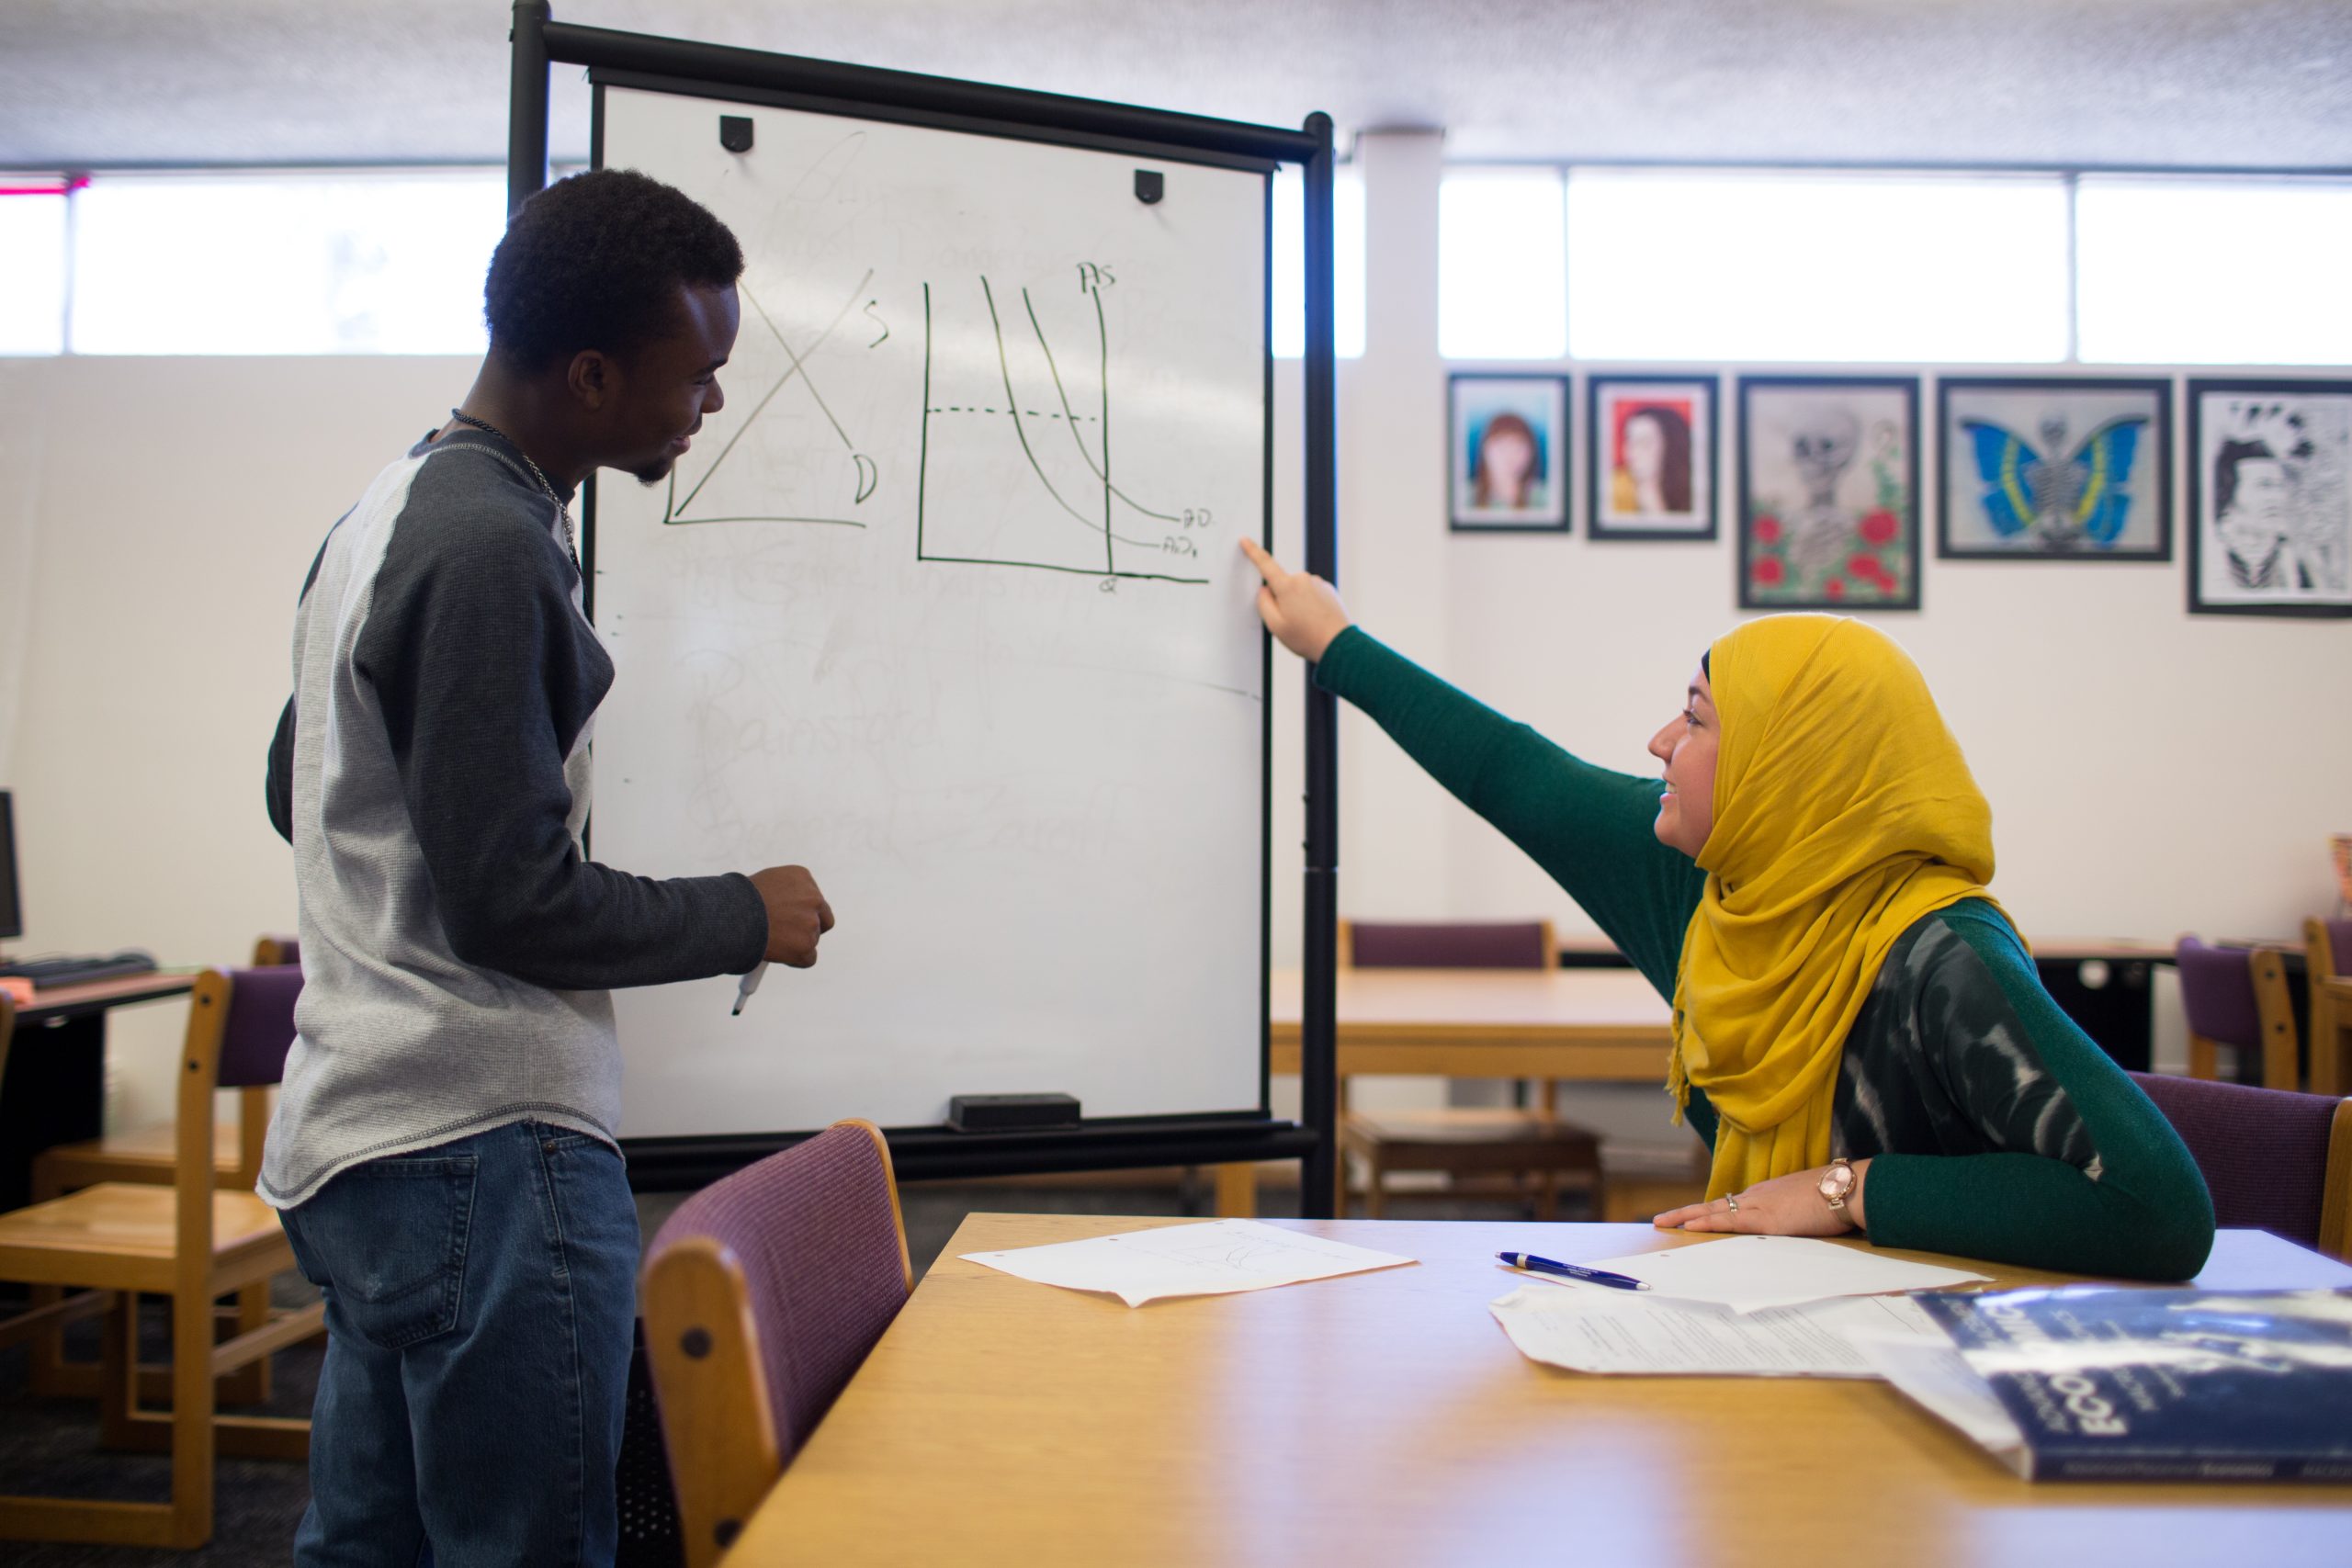 A student teaching mathematics with a whiteboard